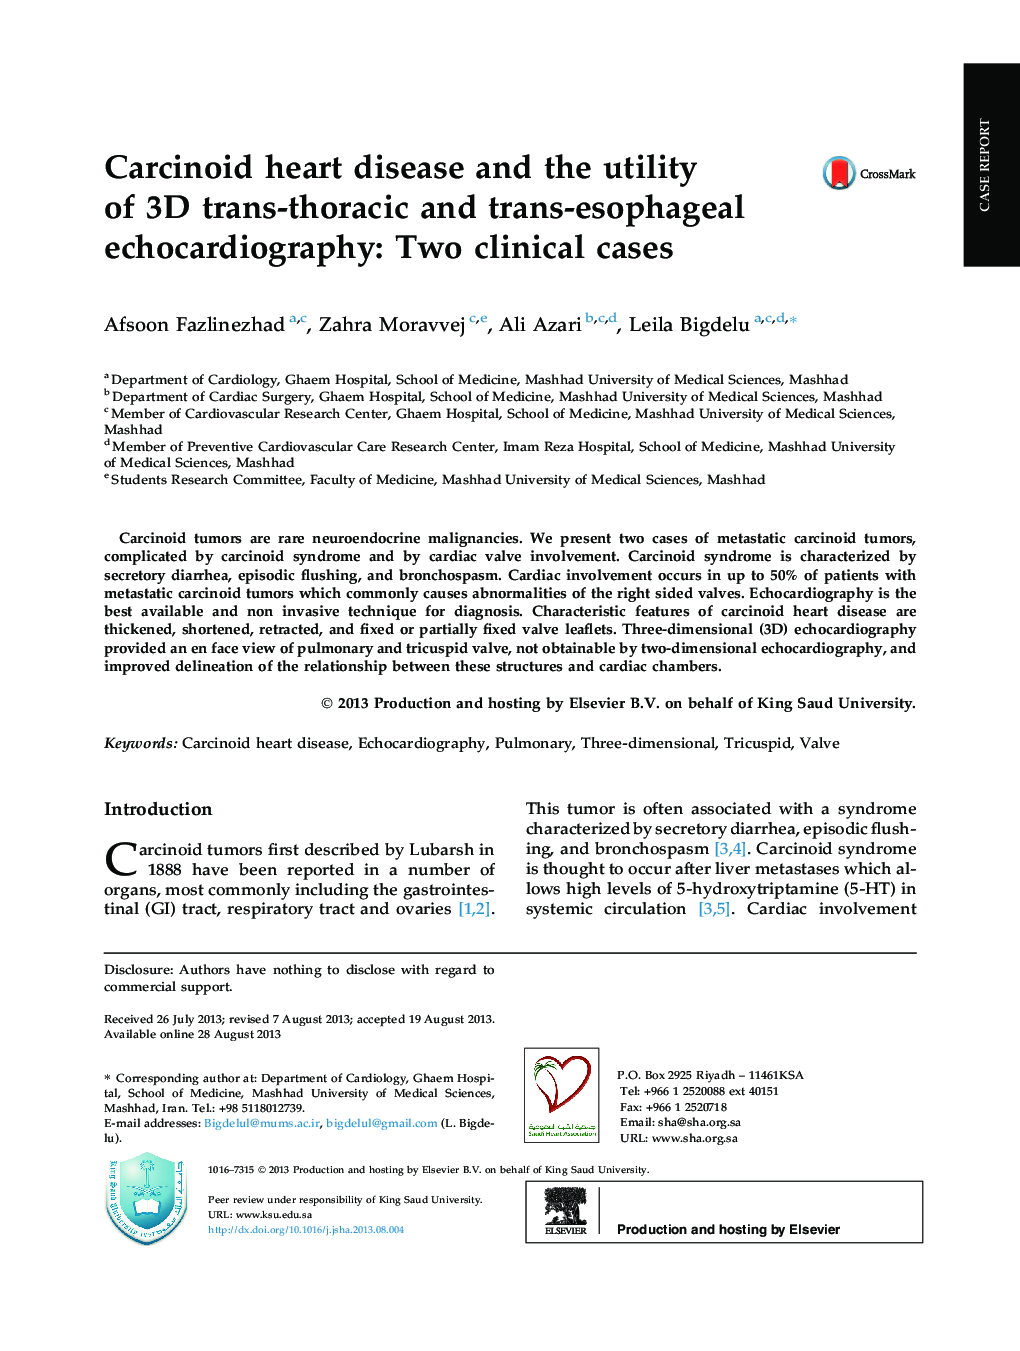 Carcinoid heart disease and the utility of 3D trans-thoracic and trans-esophageal echocardiography: Two clinical cases 